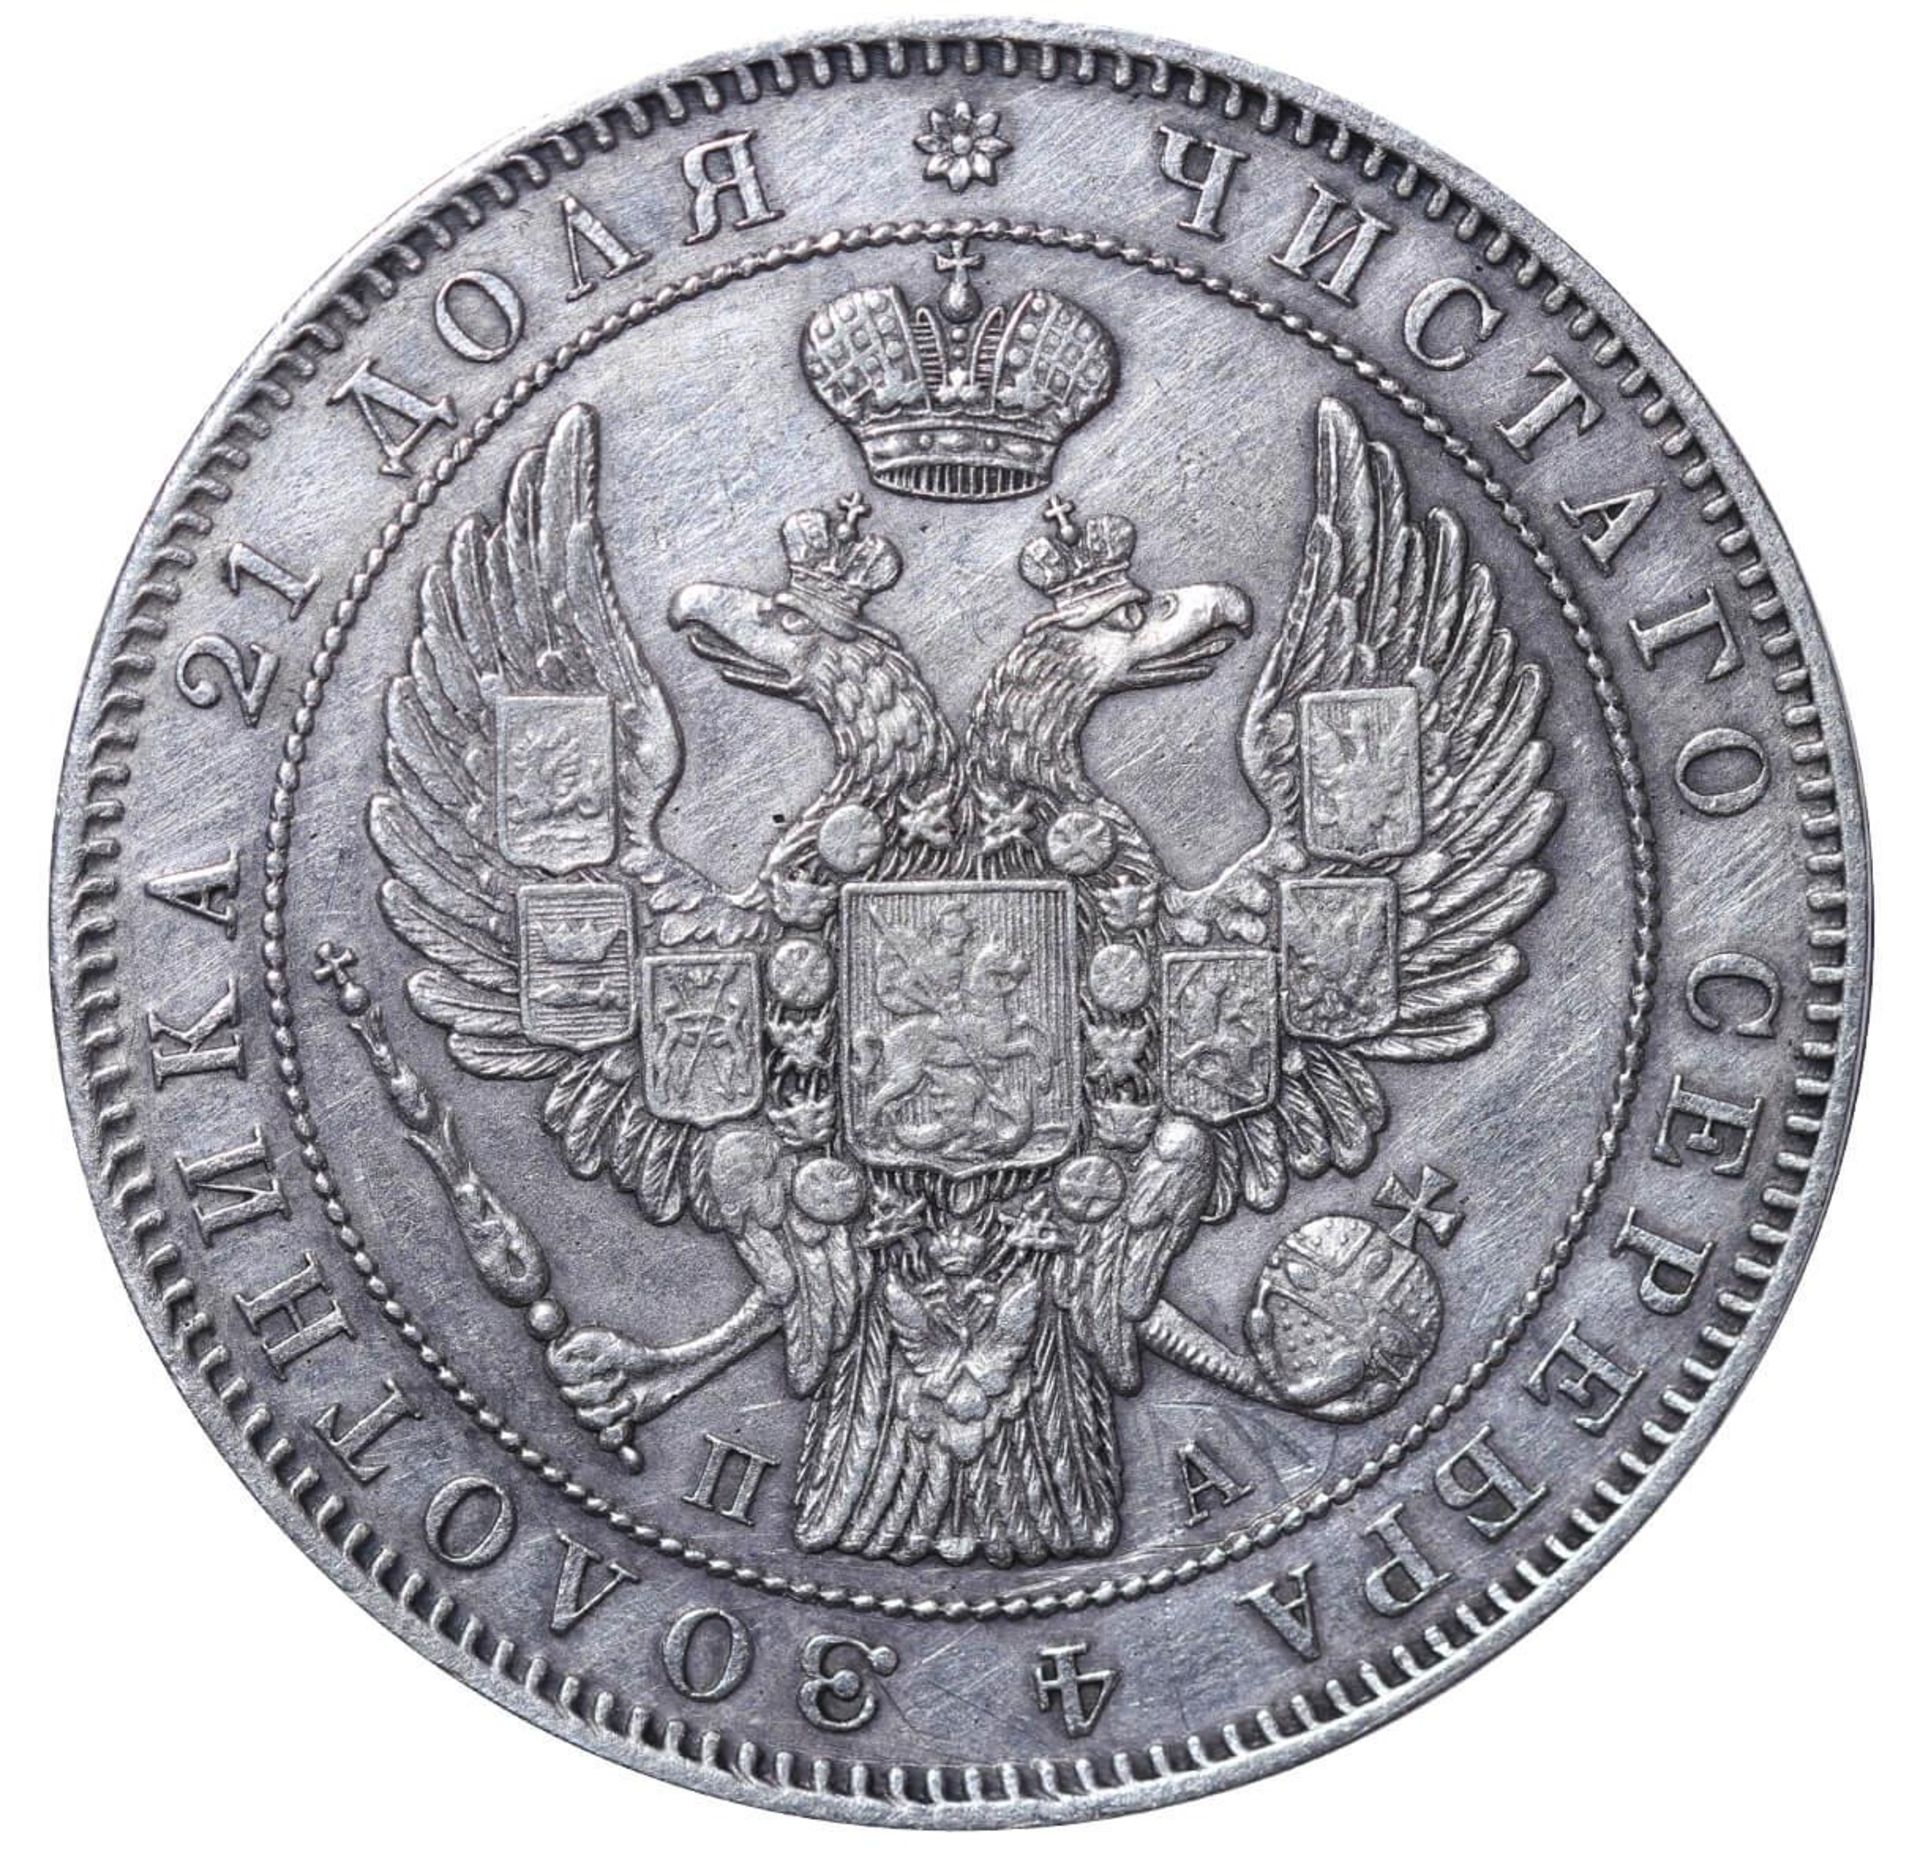 Russian Empire, 1 Rouble, 1846 year, SPB-PA - Image 3 of 3